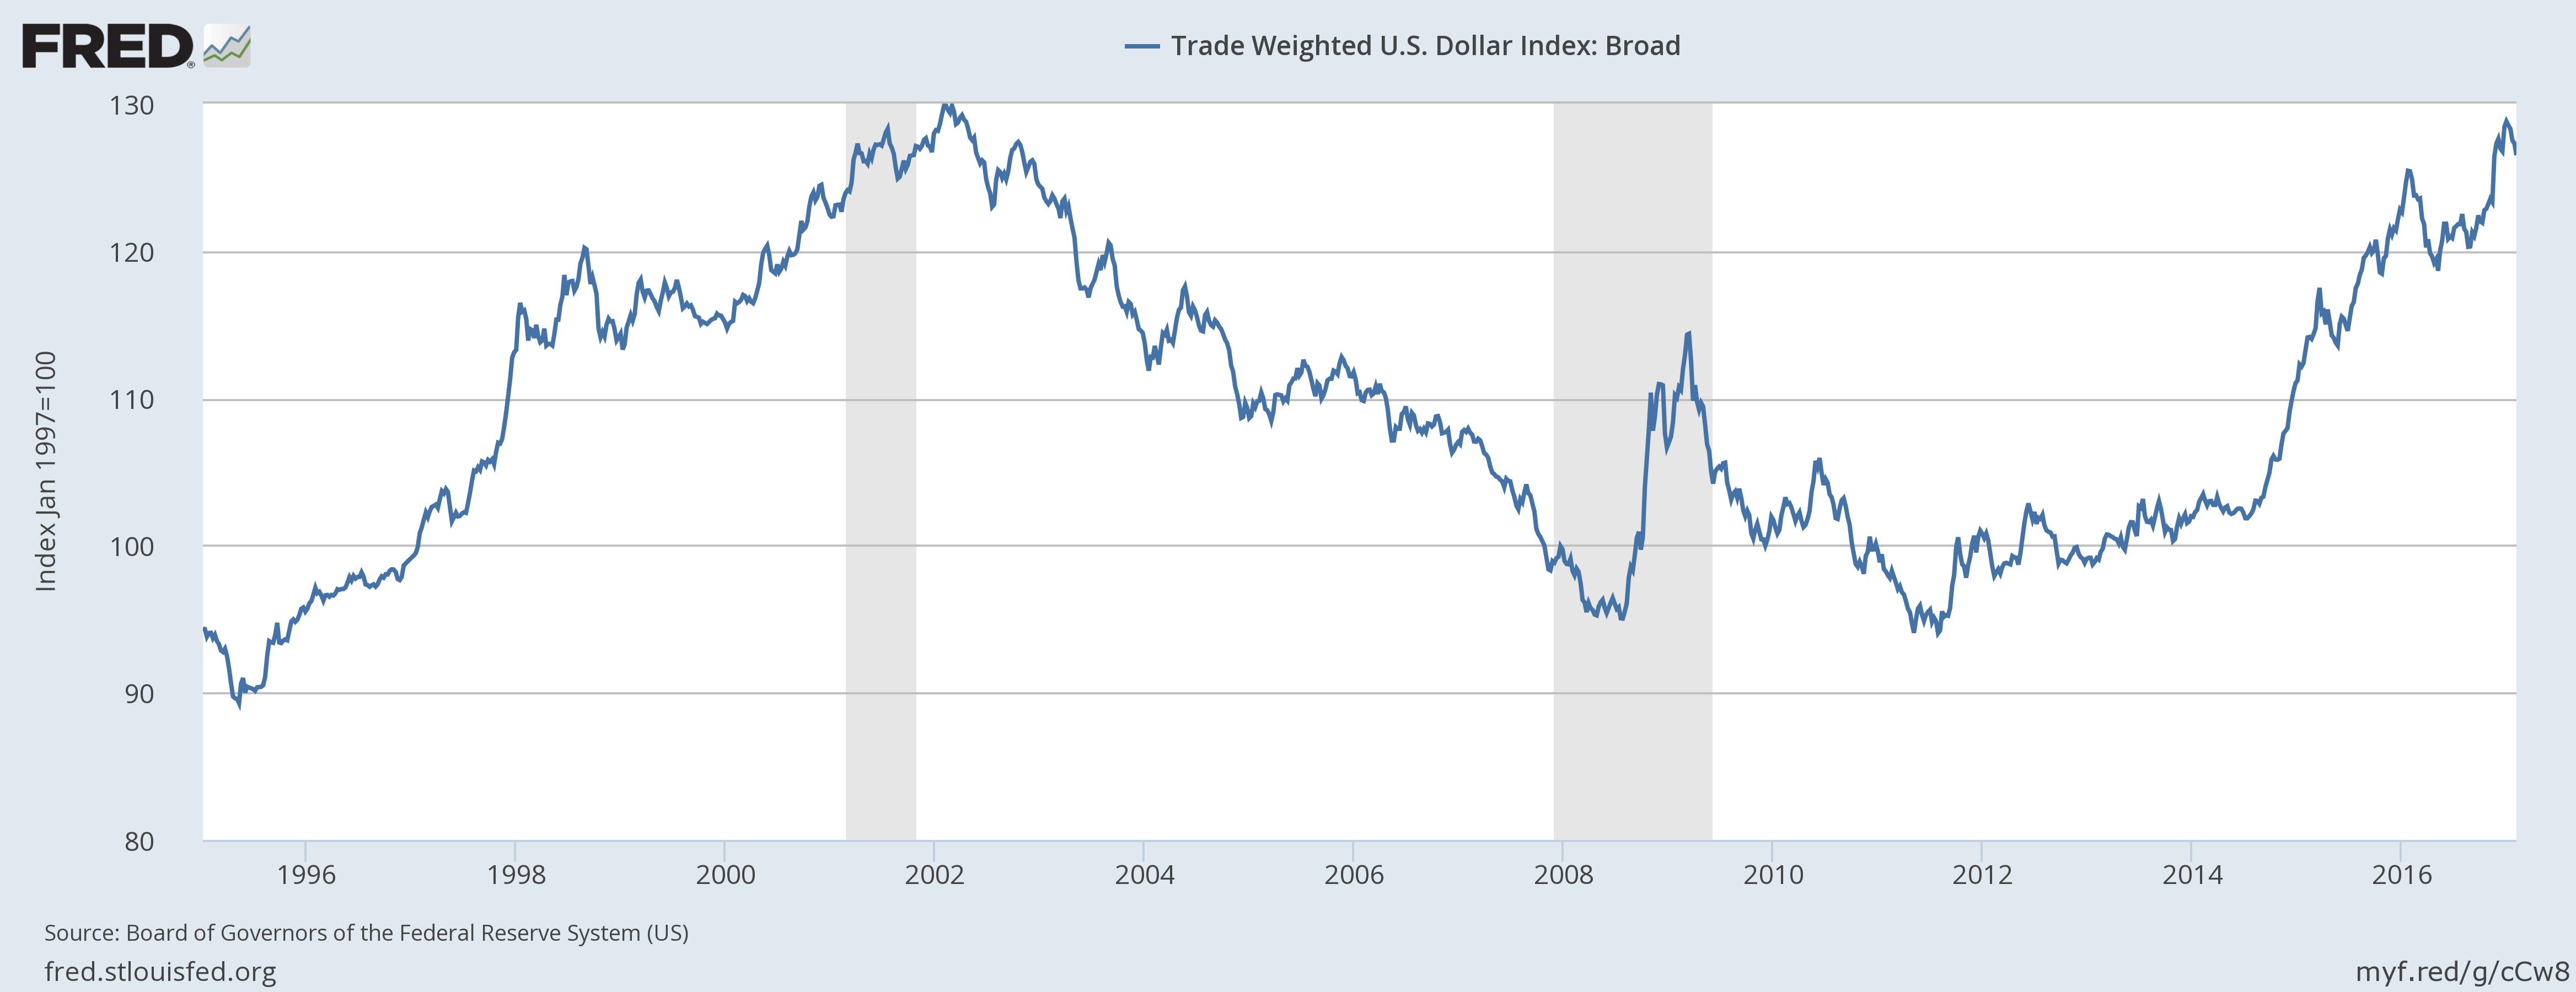 Trade Weighted Dollar Index